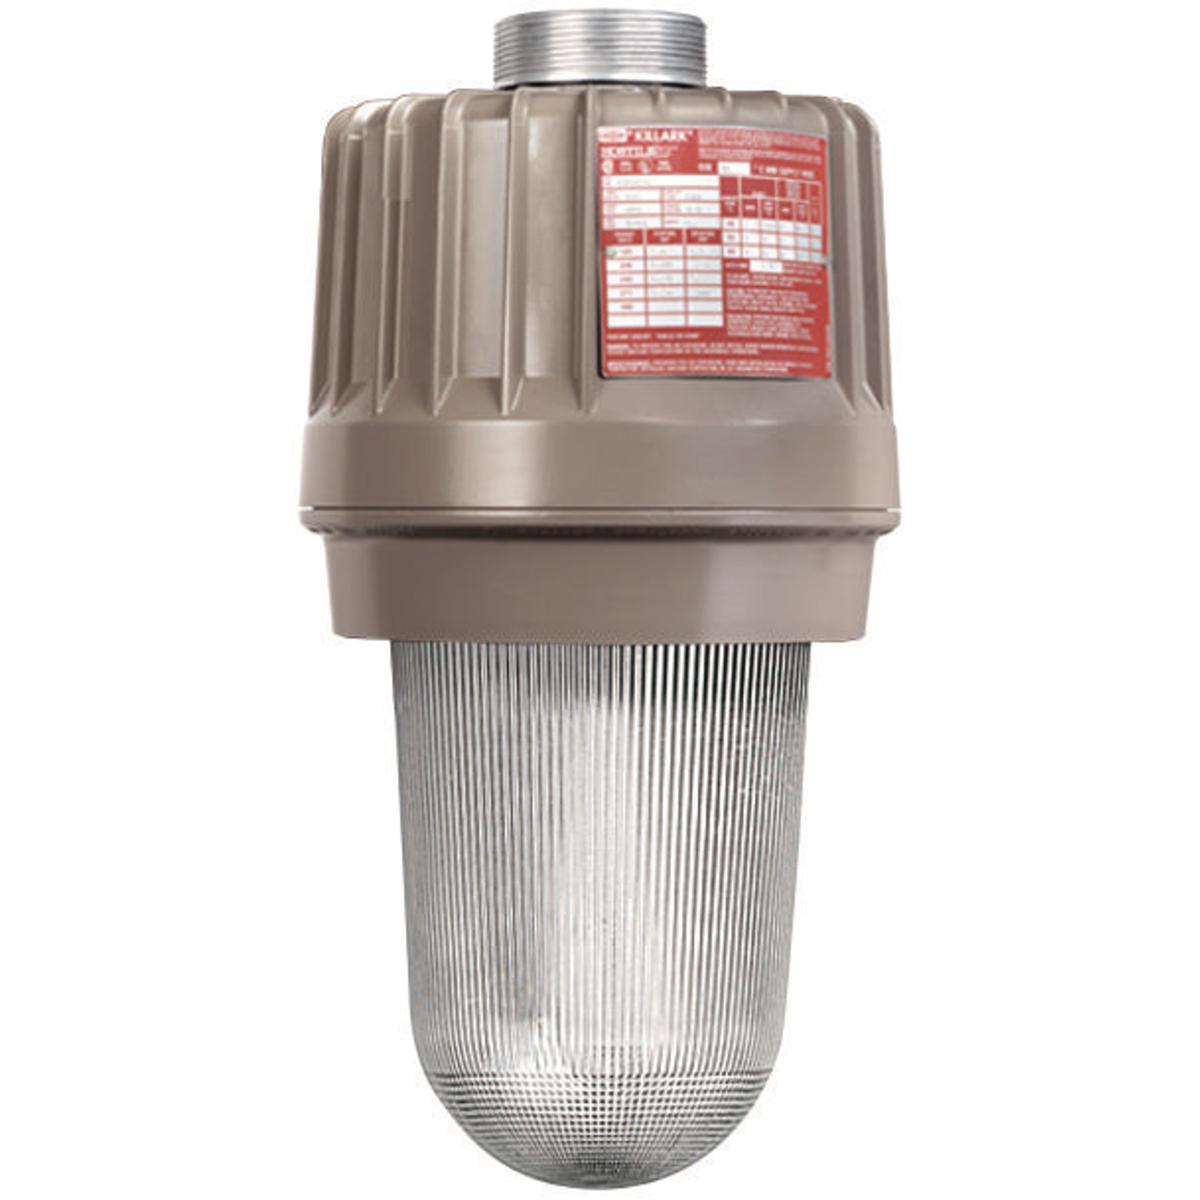 Hubbell EZP170Q 175W Quadri-Volt Metal Halide with Auxiliary Quartz Standby  ; Three light sources – High Pressure Sodium (50-400W), Metal Halide (70-400W) and Pulse Start Metal Halide (175-400W) ; Mounting choice –Pendant, ceiling, 25˚ stanchion or 90˚ wall mount, all w